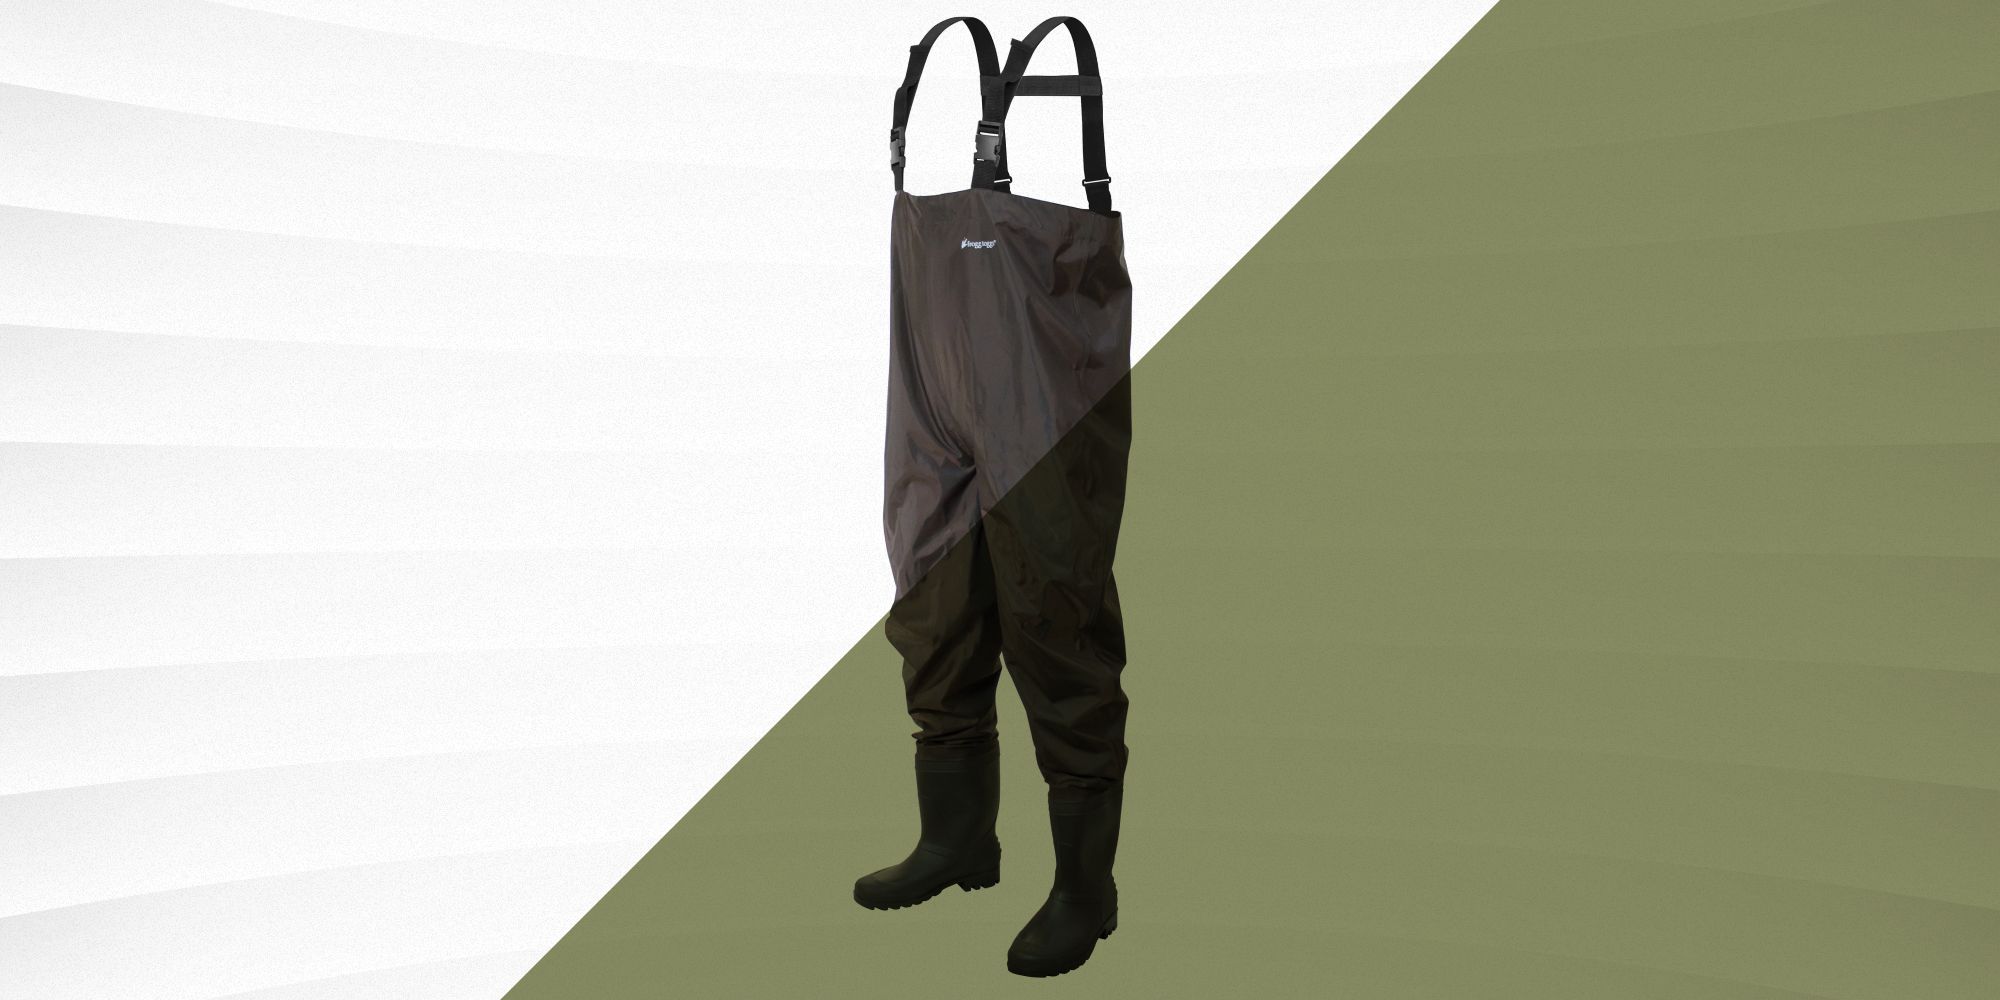 Mens Waiters with Boots Waterproof Overall Chest Waders Fishing Hunting Top 2021 